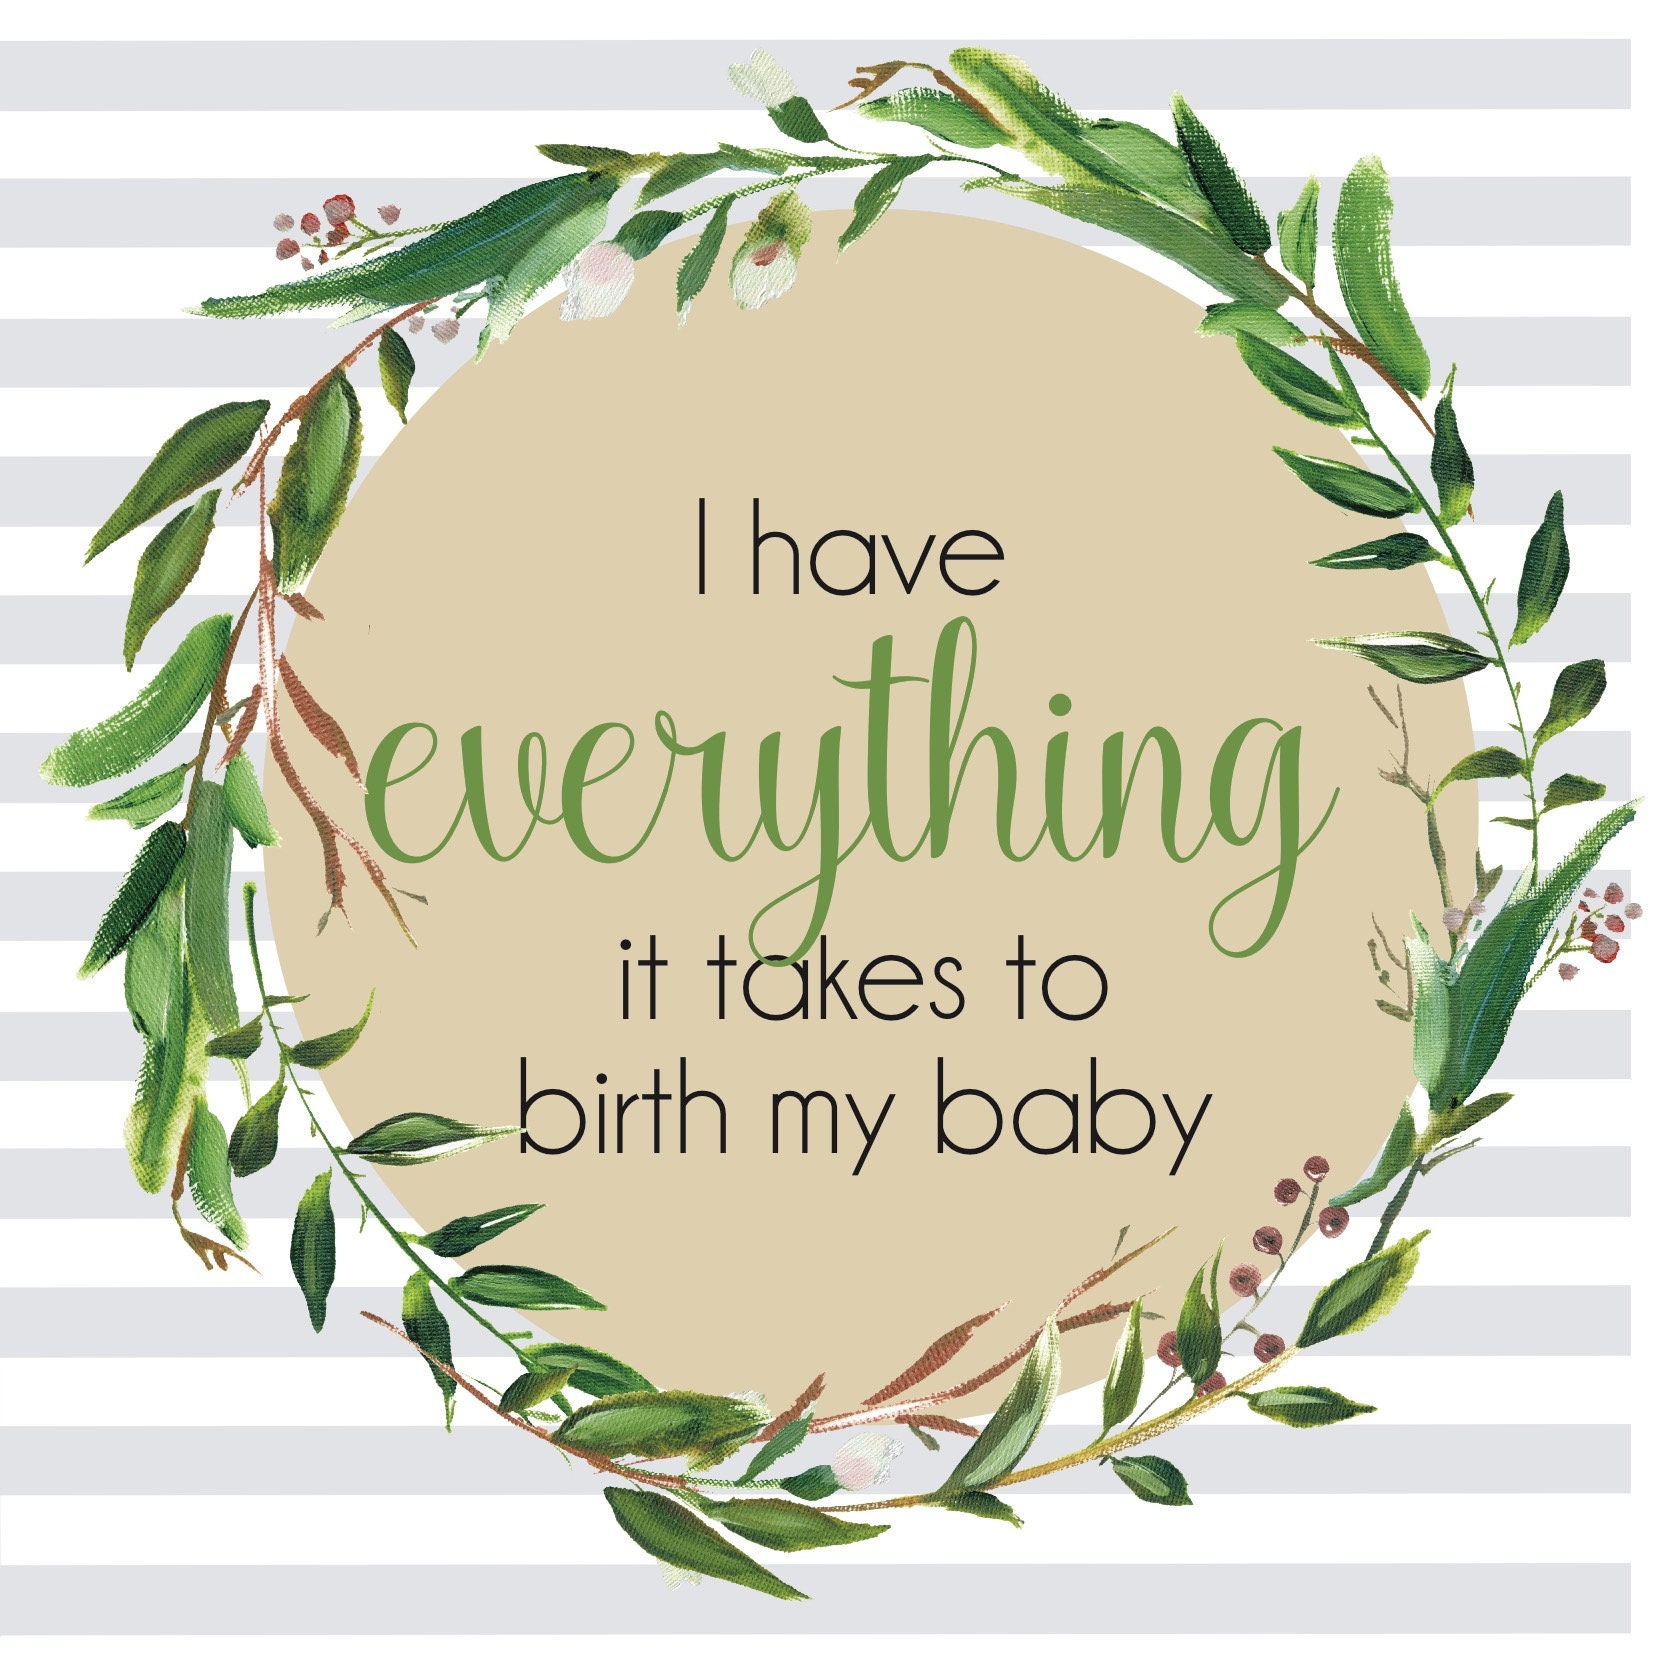 Birth Affirmation Printable Download Cards: Release & Relax | Etsy